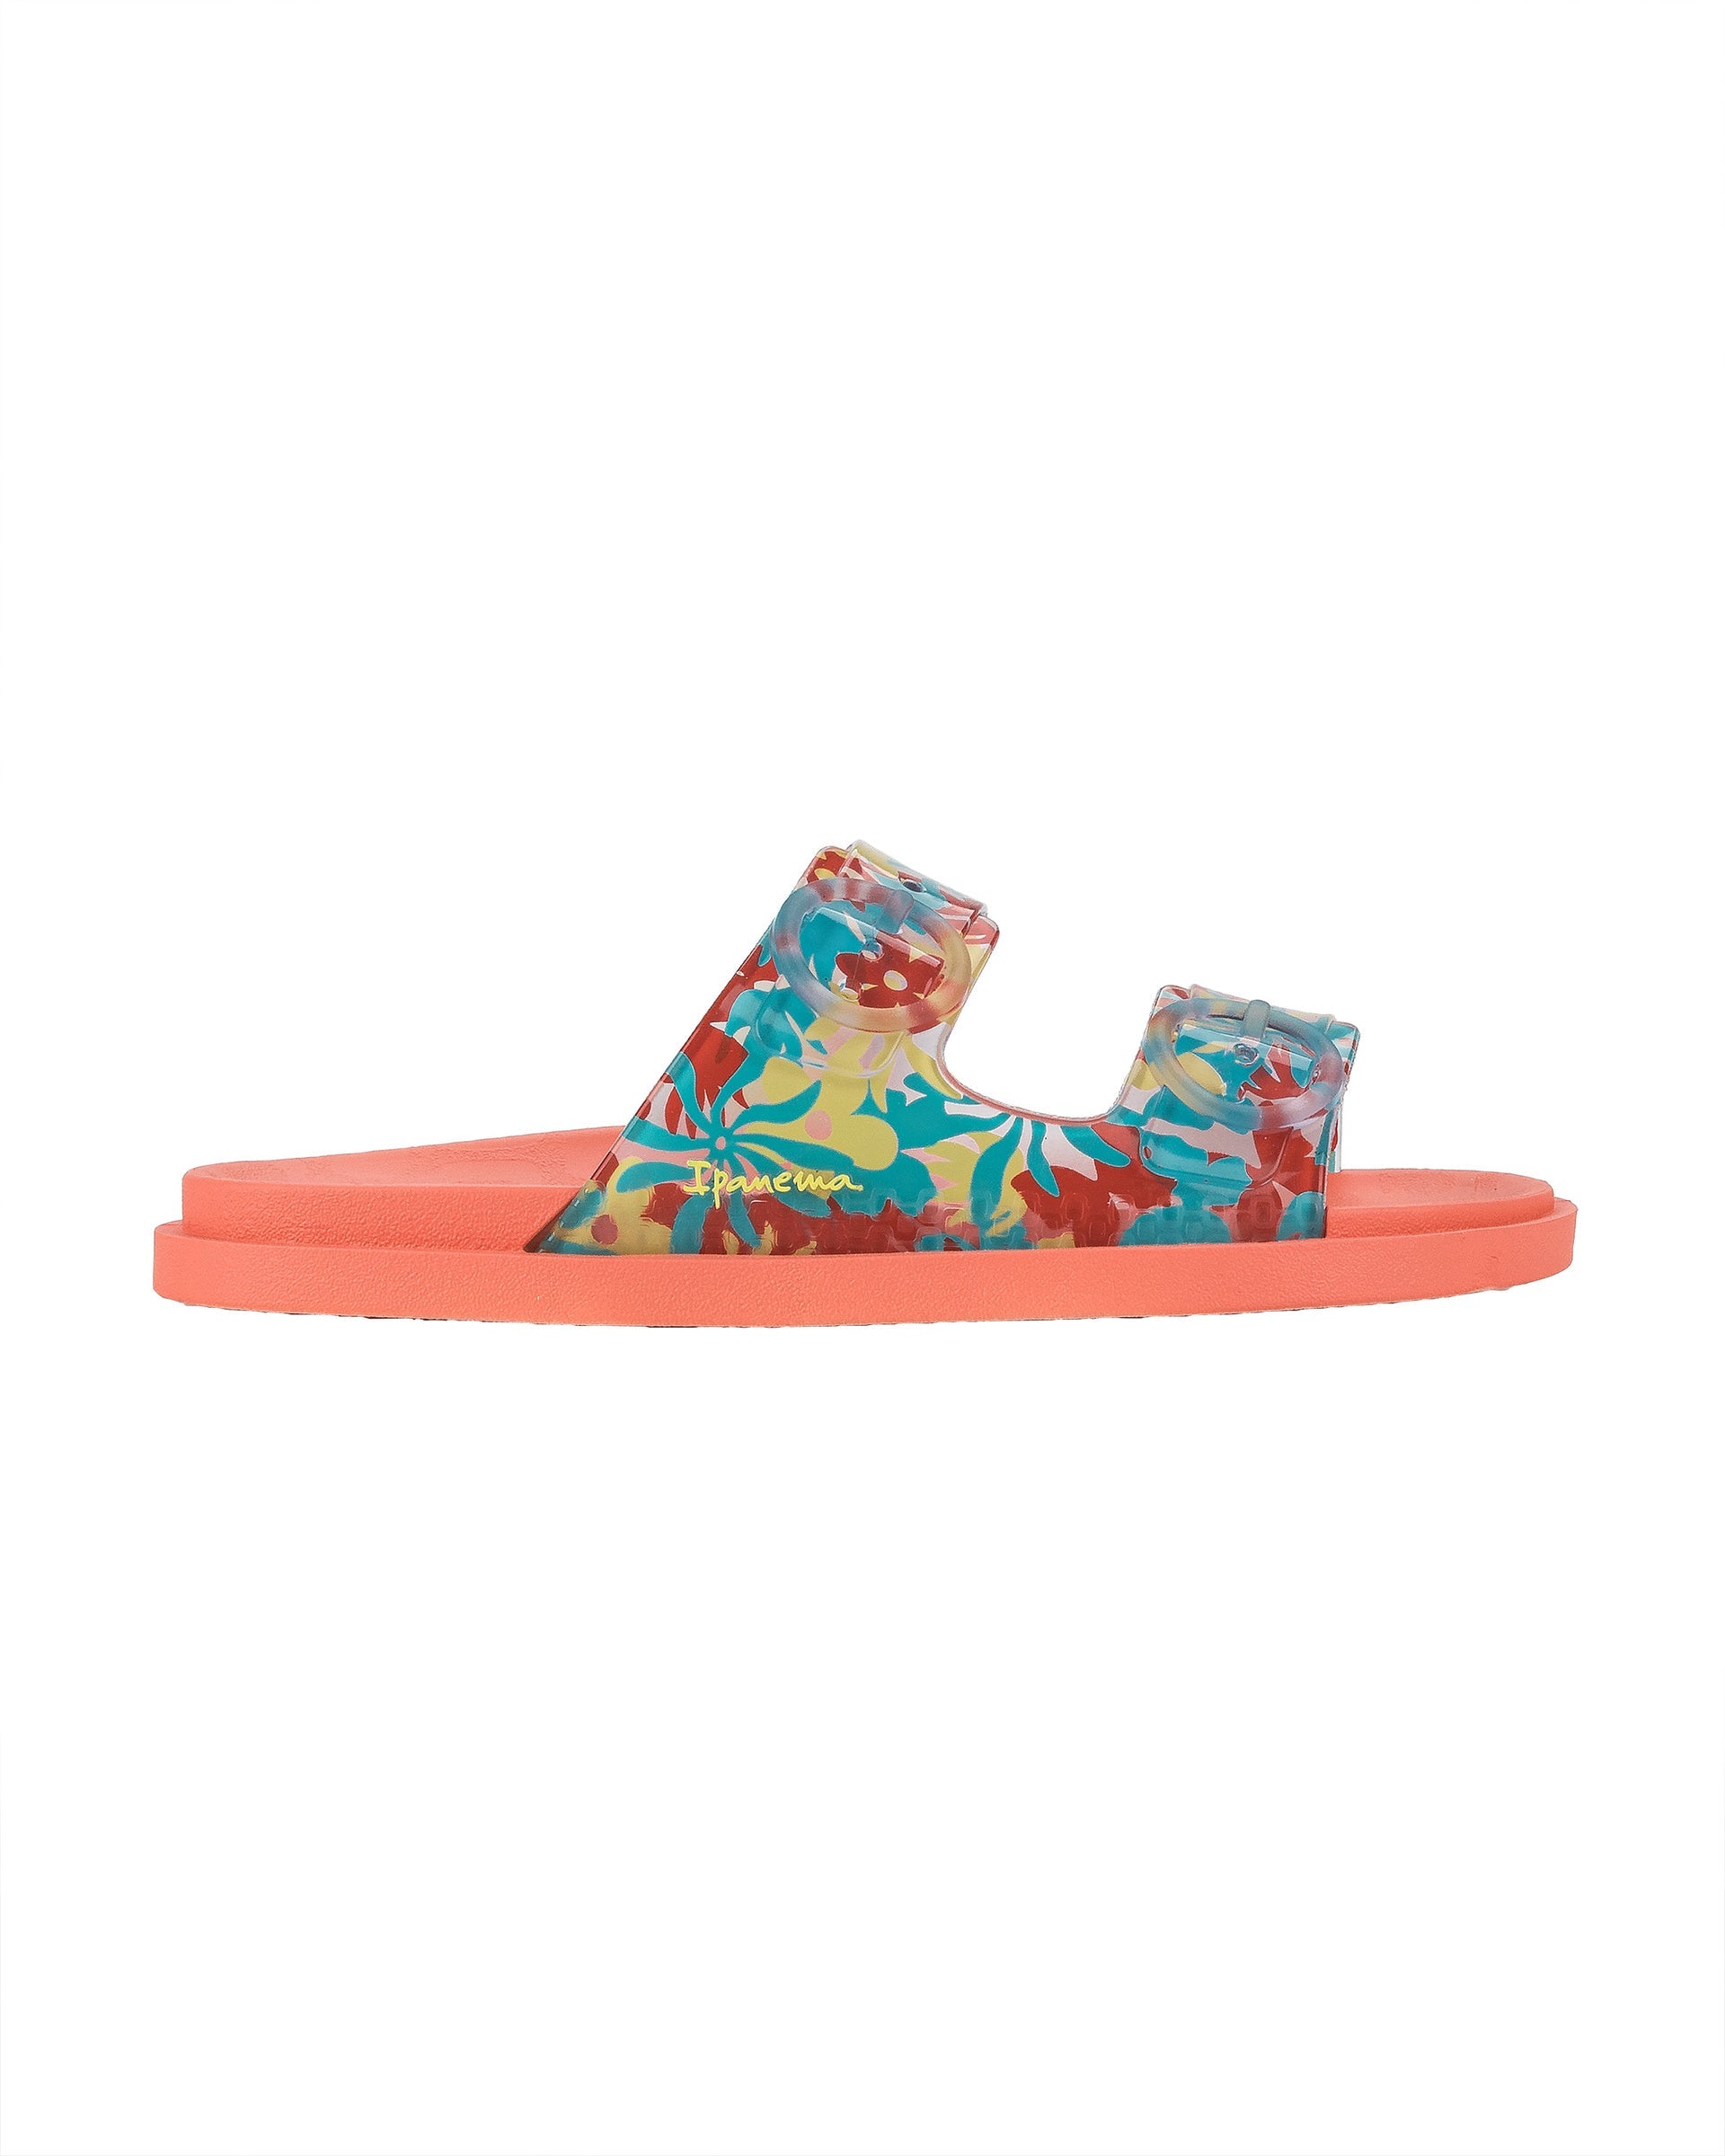 Outer side view of a orange Ipanema Follow kids slide with floral print on the upper.